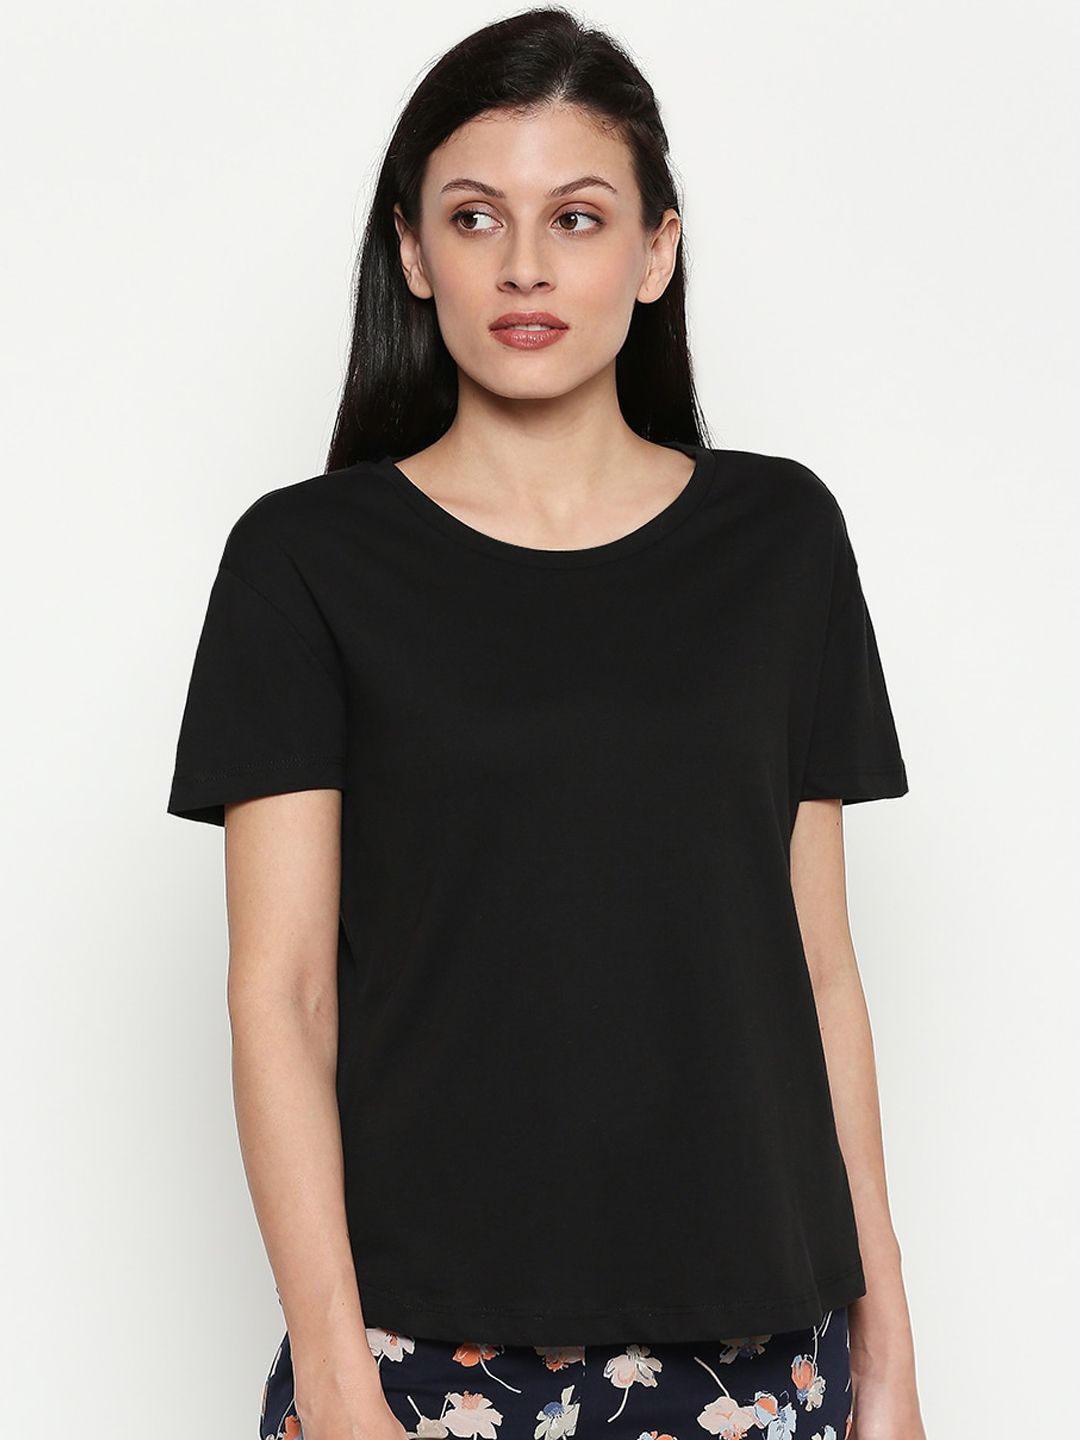 Dreamz by Pantaloons Women Black Solid Cotton Lounge T-shirt Price in India